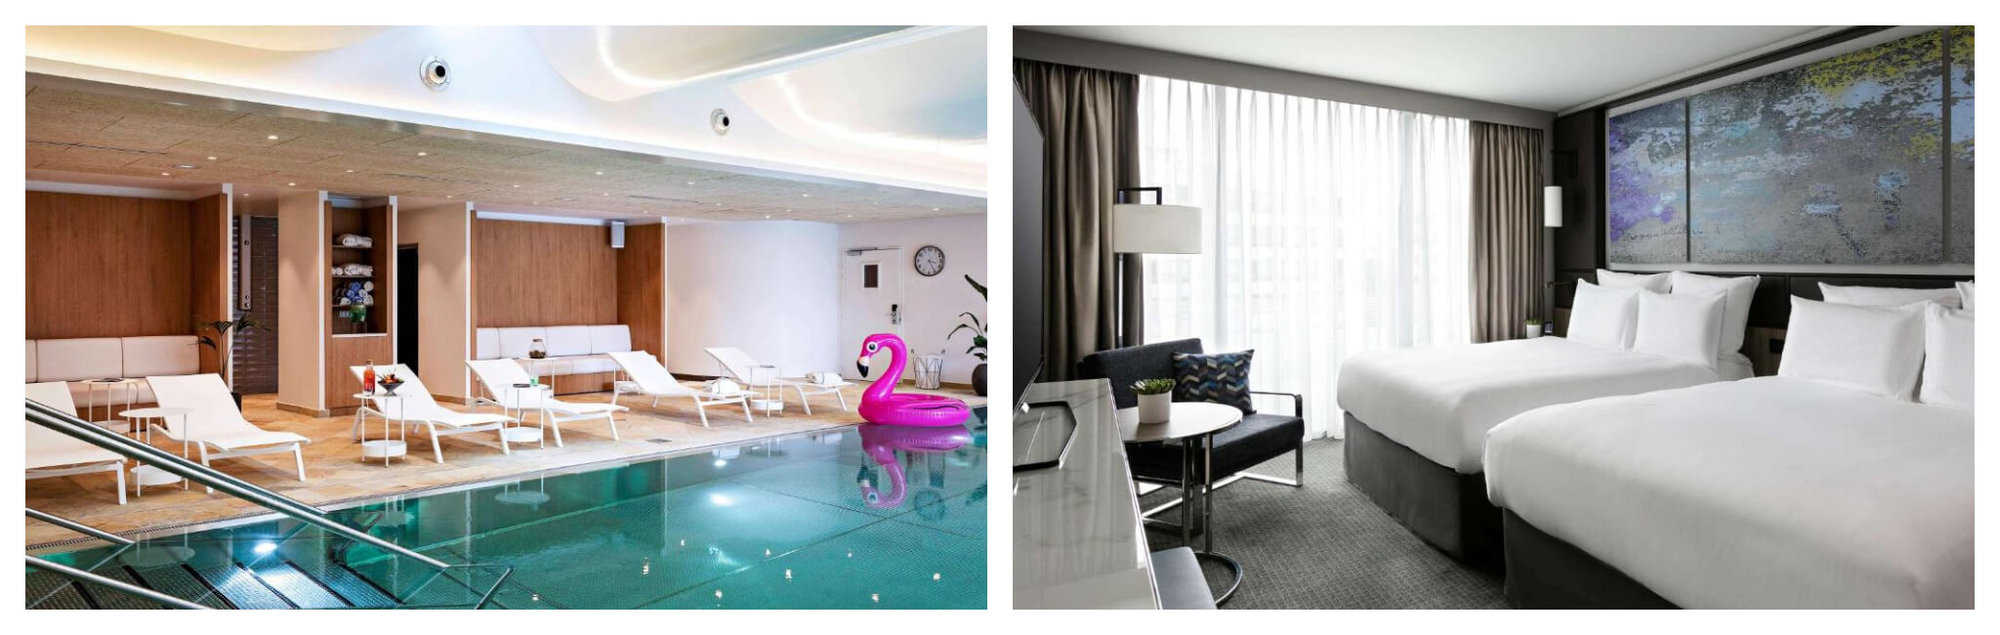 Pullman Paris Centre’s indoor swimming pool with several white deckchairs and a pink flamingo swim ring; Right: Pullman Paris Centre’s family suite with two double beds with white sheets and pillows.